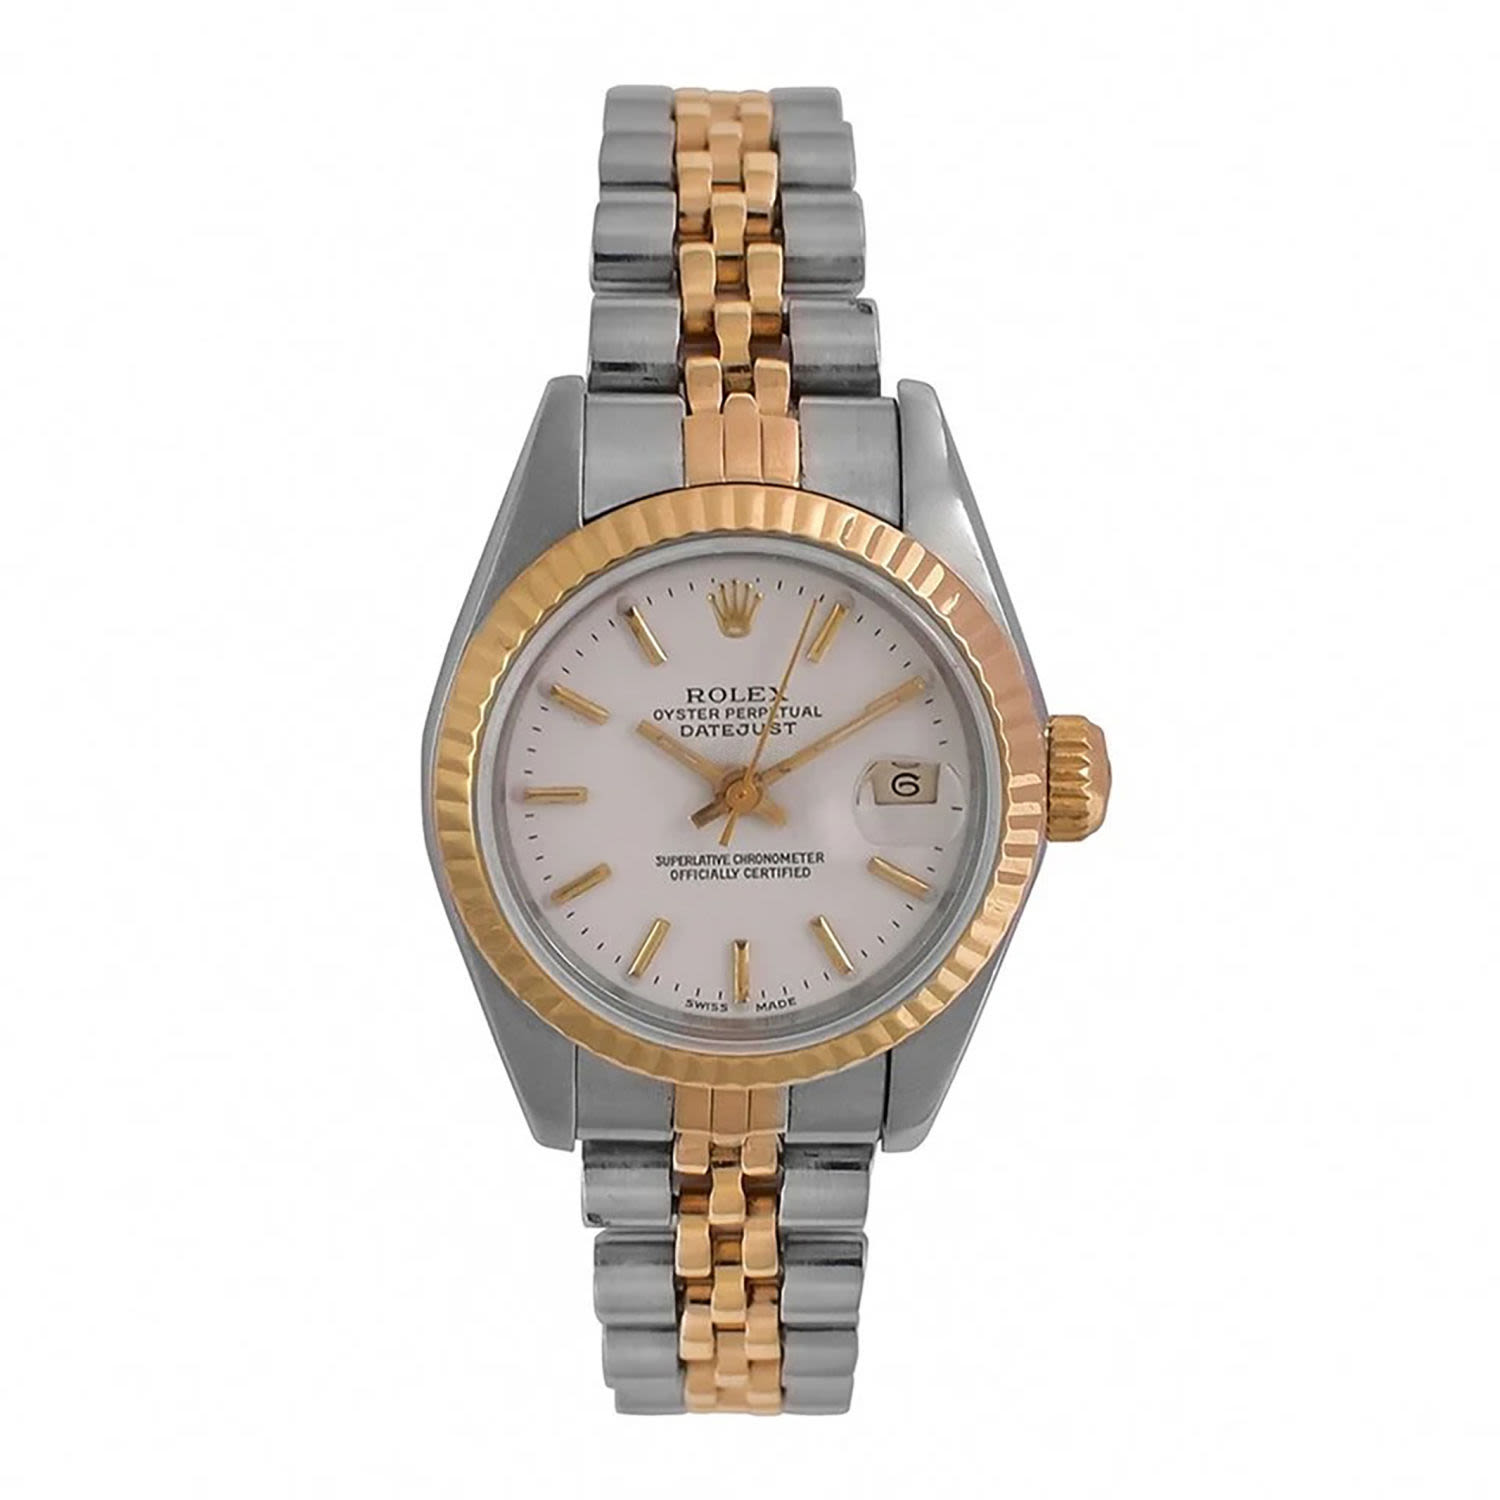 Rolex Lady Datejust wristwatch, in gold and steel, year 1986